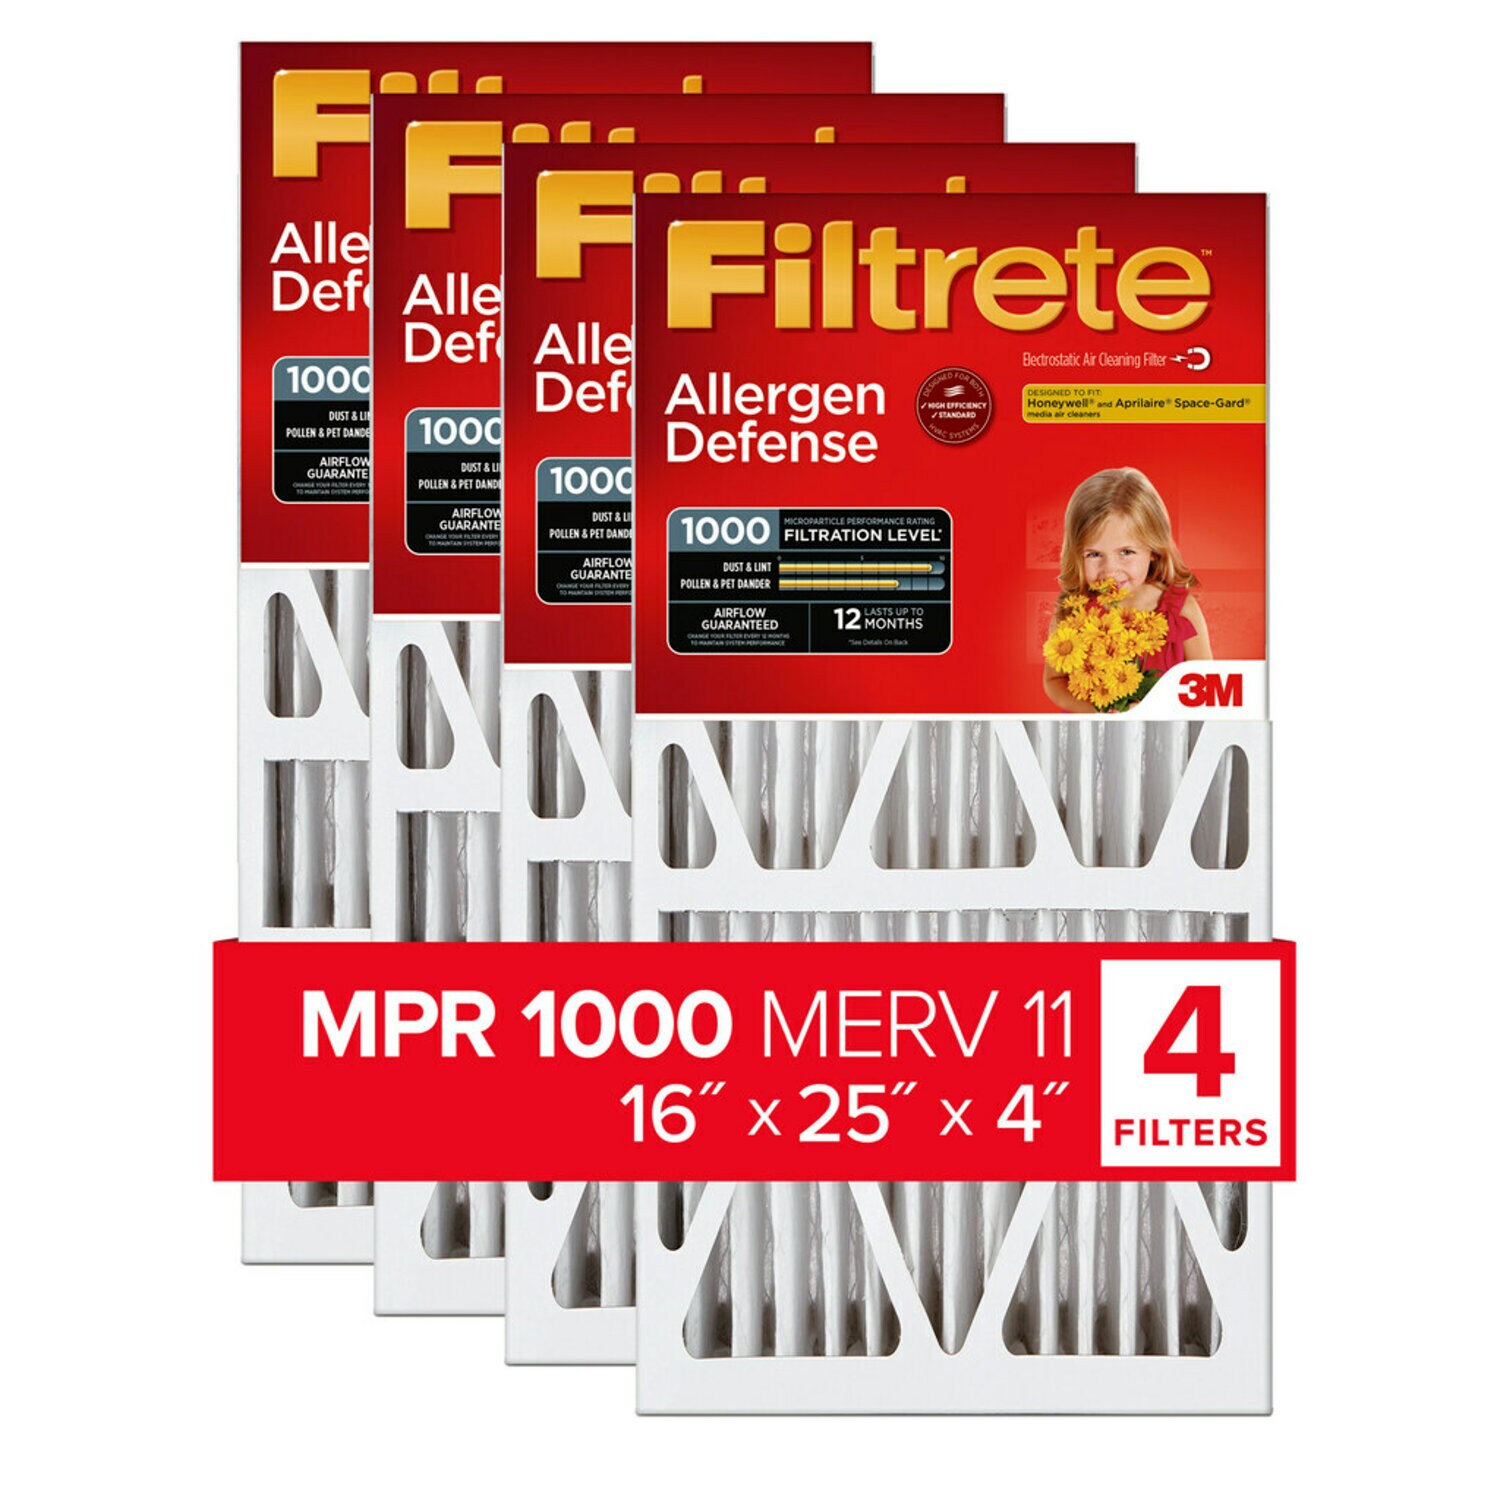 7100097241 - Filtrete Allergen Reduction Deep Pleat Filter NADP01-4IN-4, 16 in x 25 in x 4 in, 1/Pack, 4 eaches/case